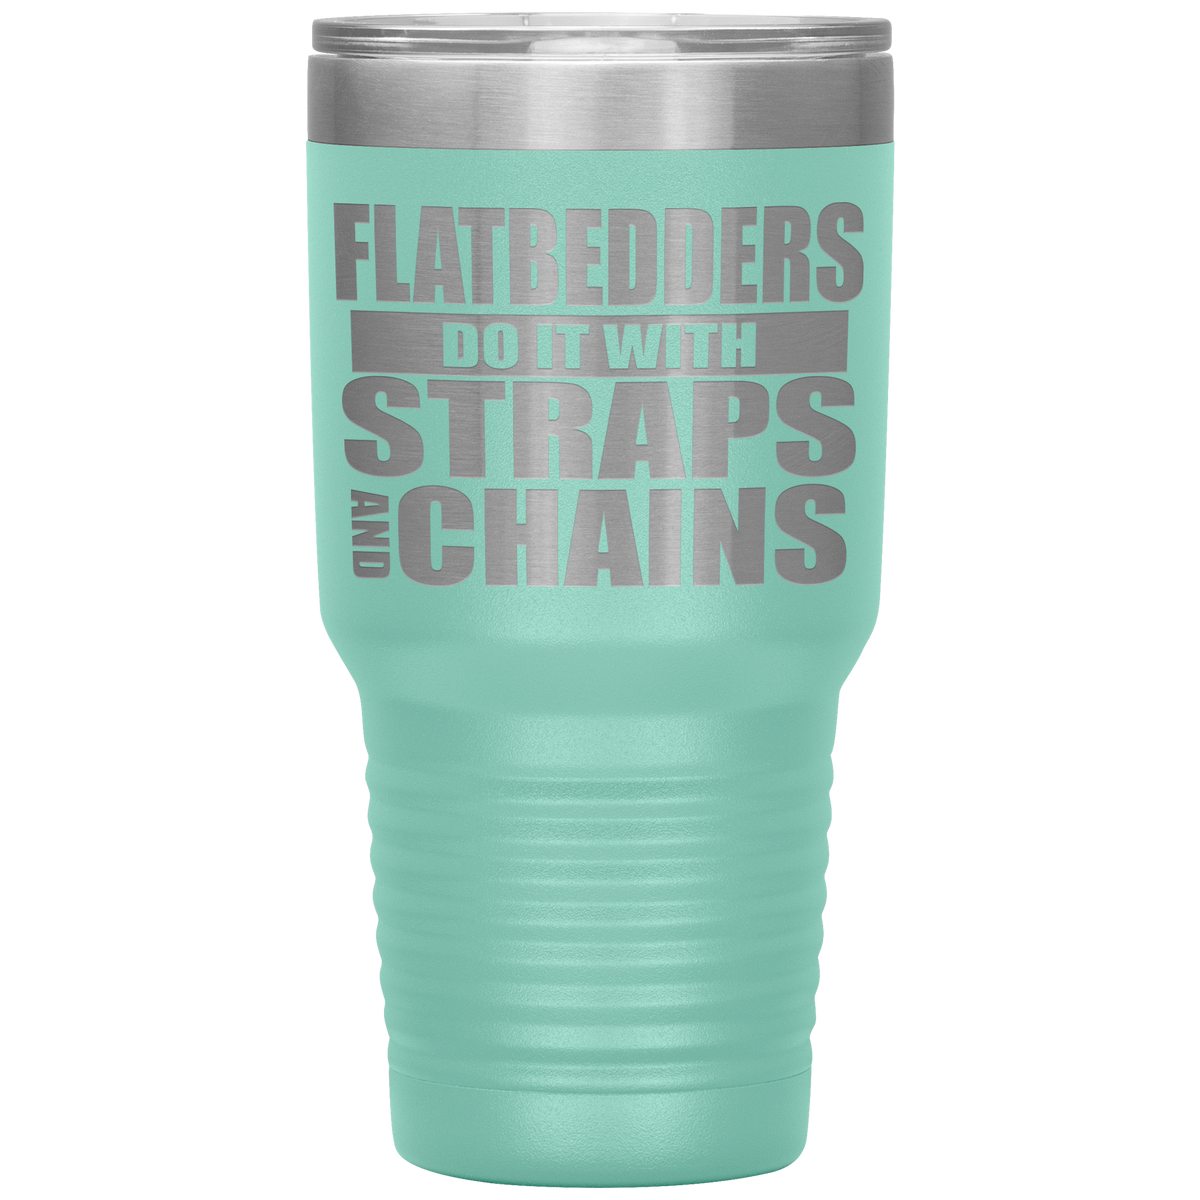 Flatbedders Do It with Straps and Chains 30oz Tumbler Free Shipping